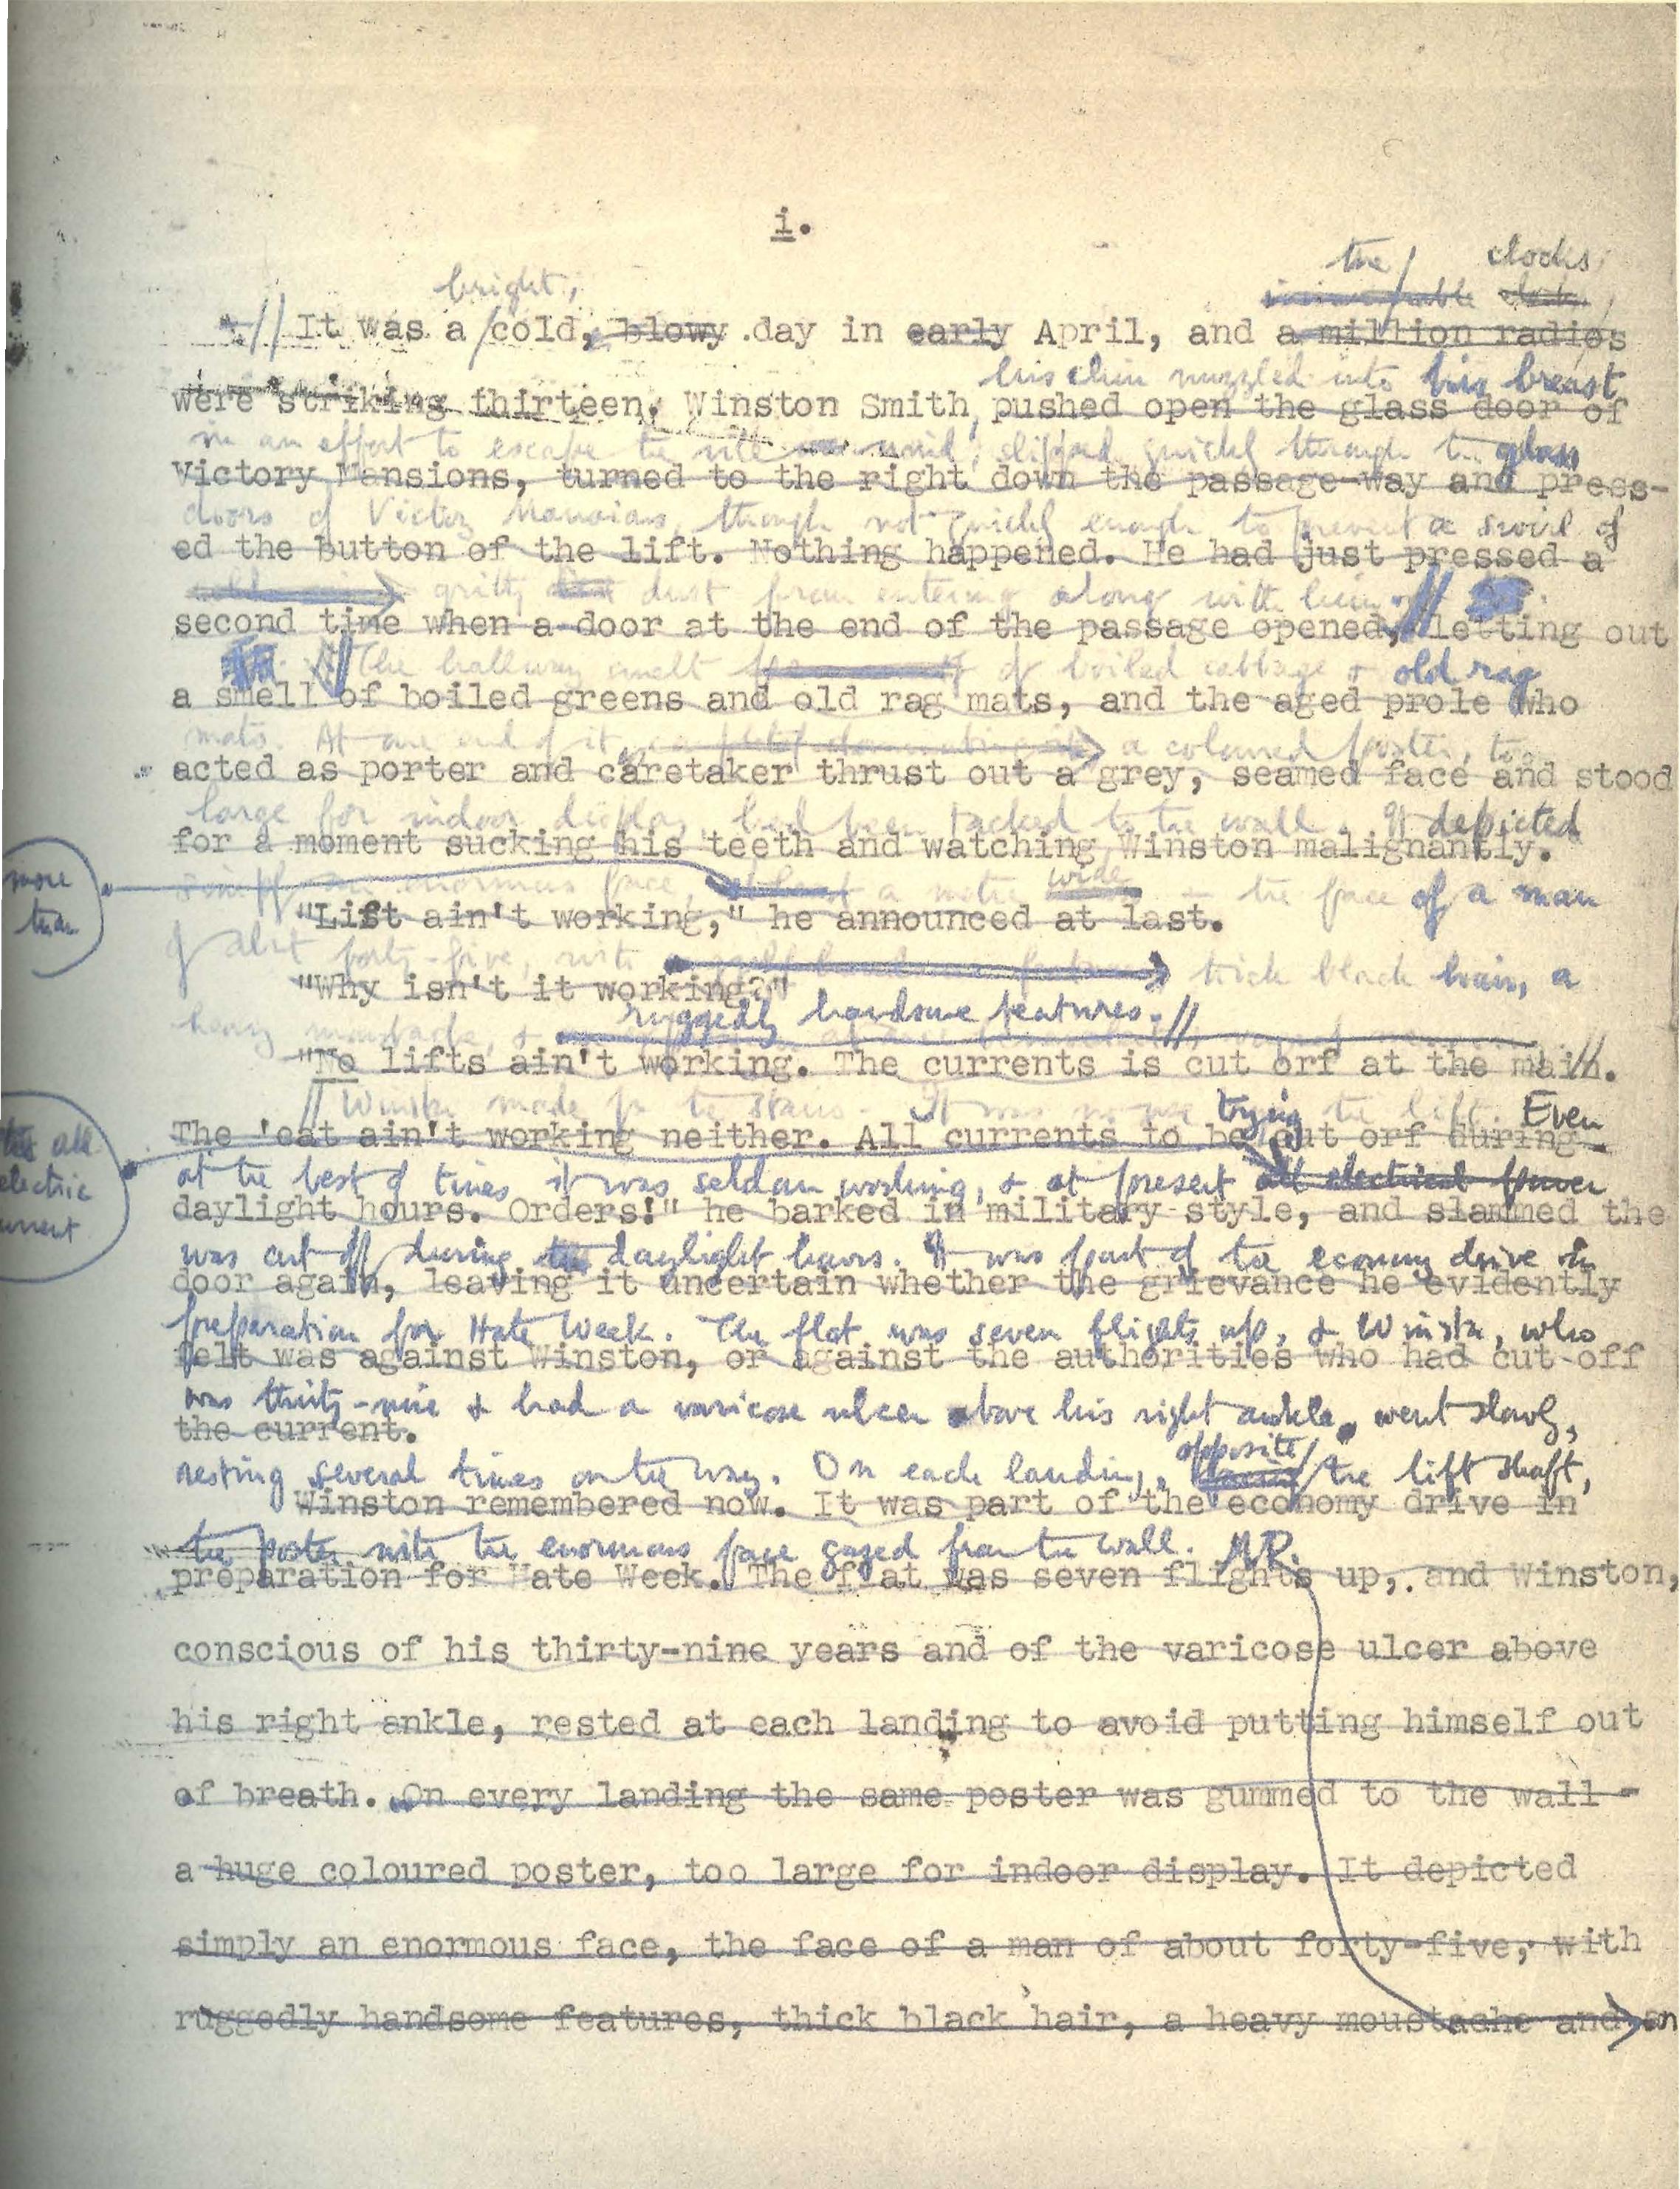 A heavily-edited manuscript of George Orwell's 1984